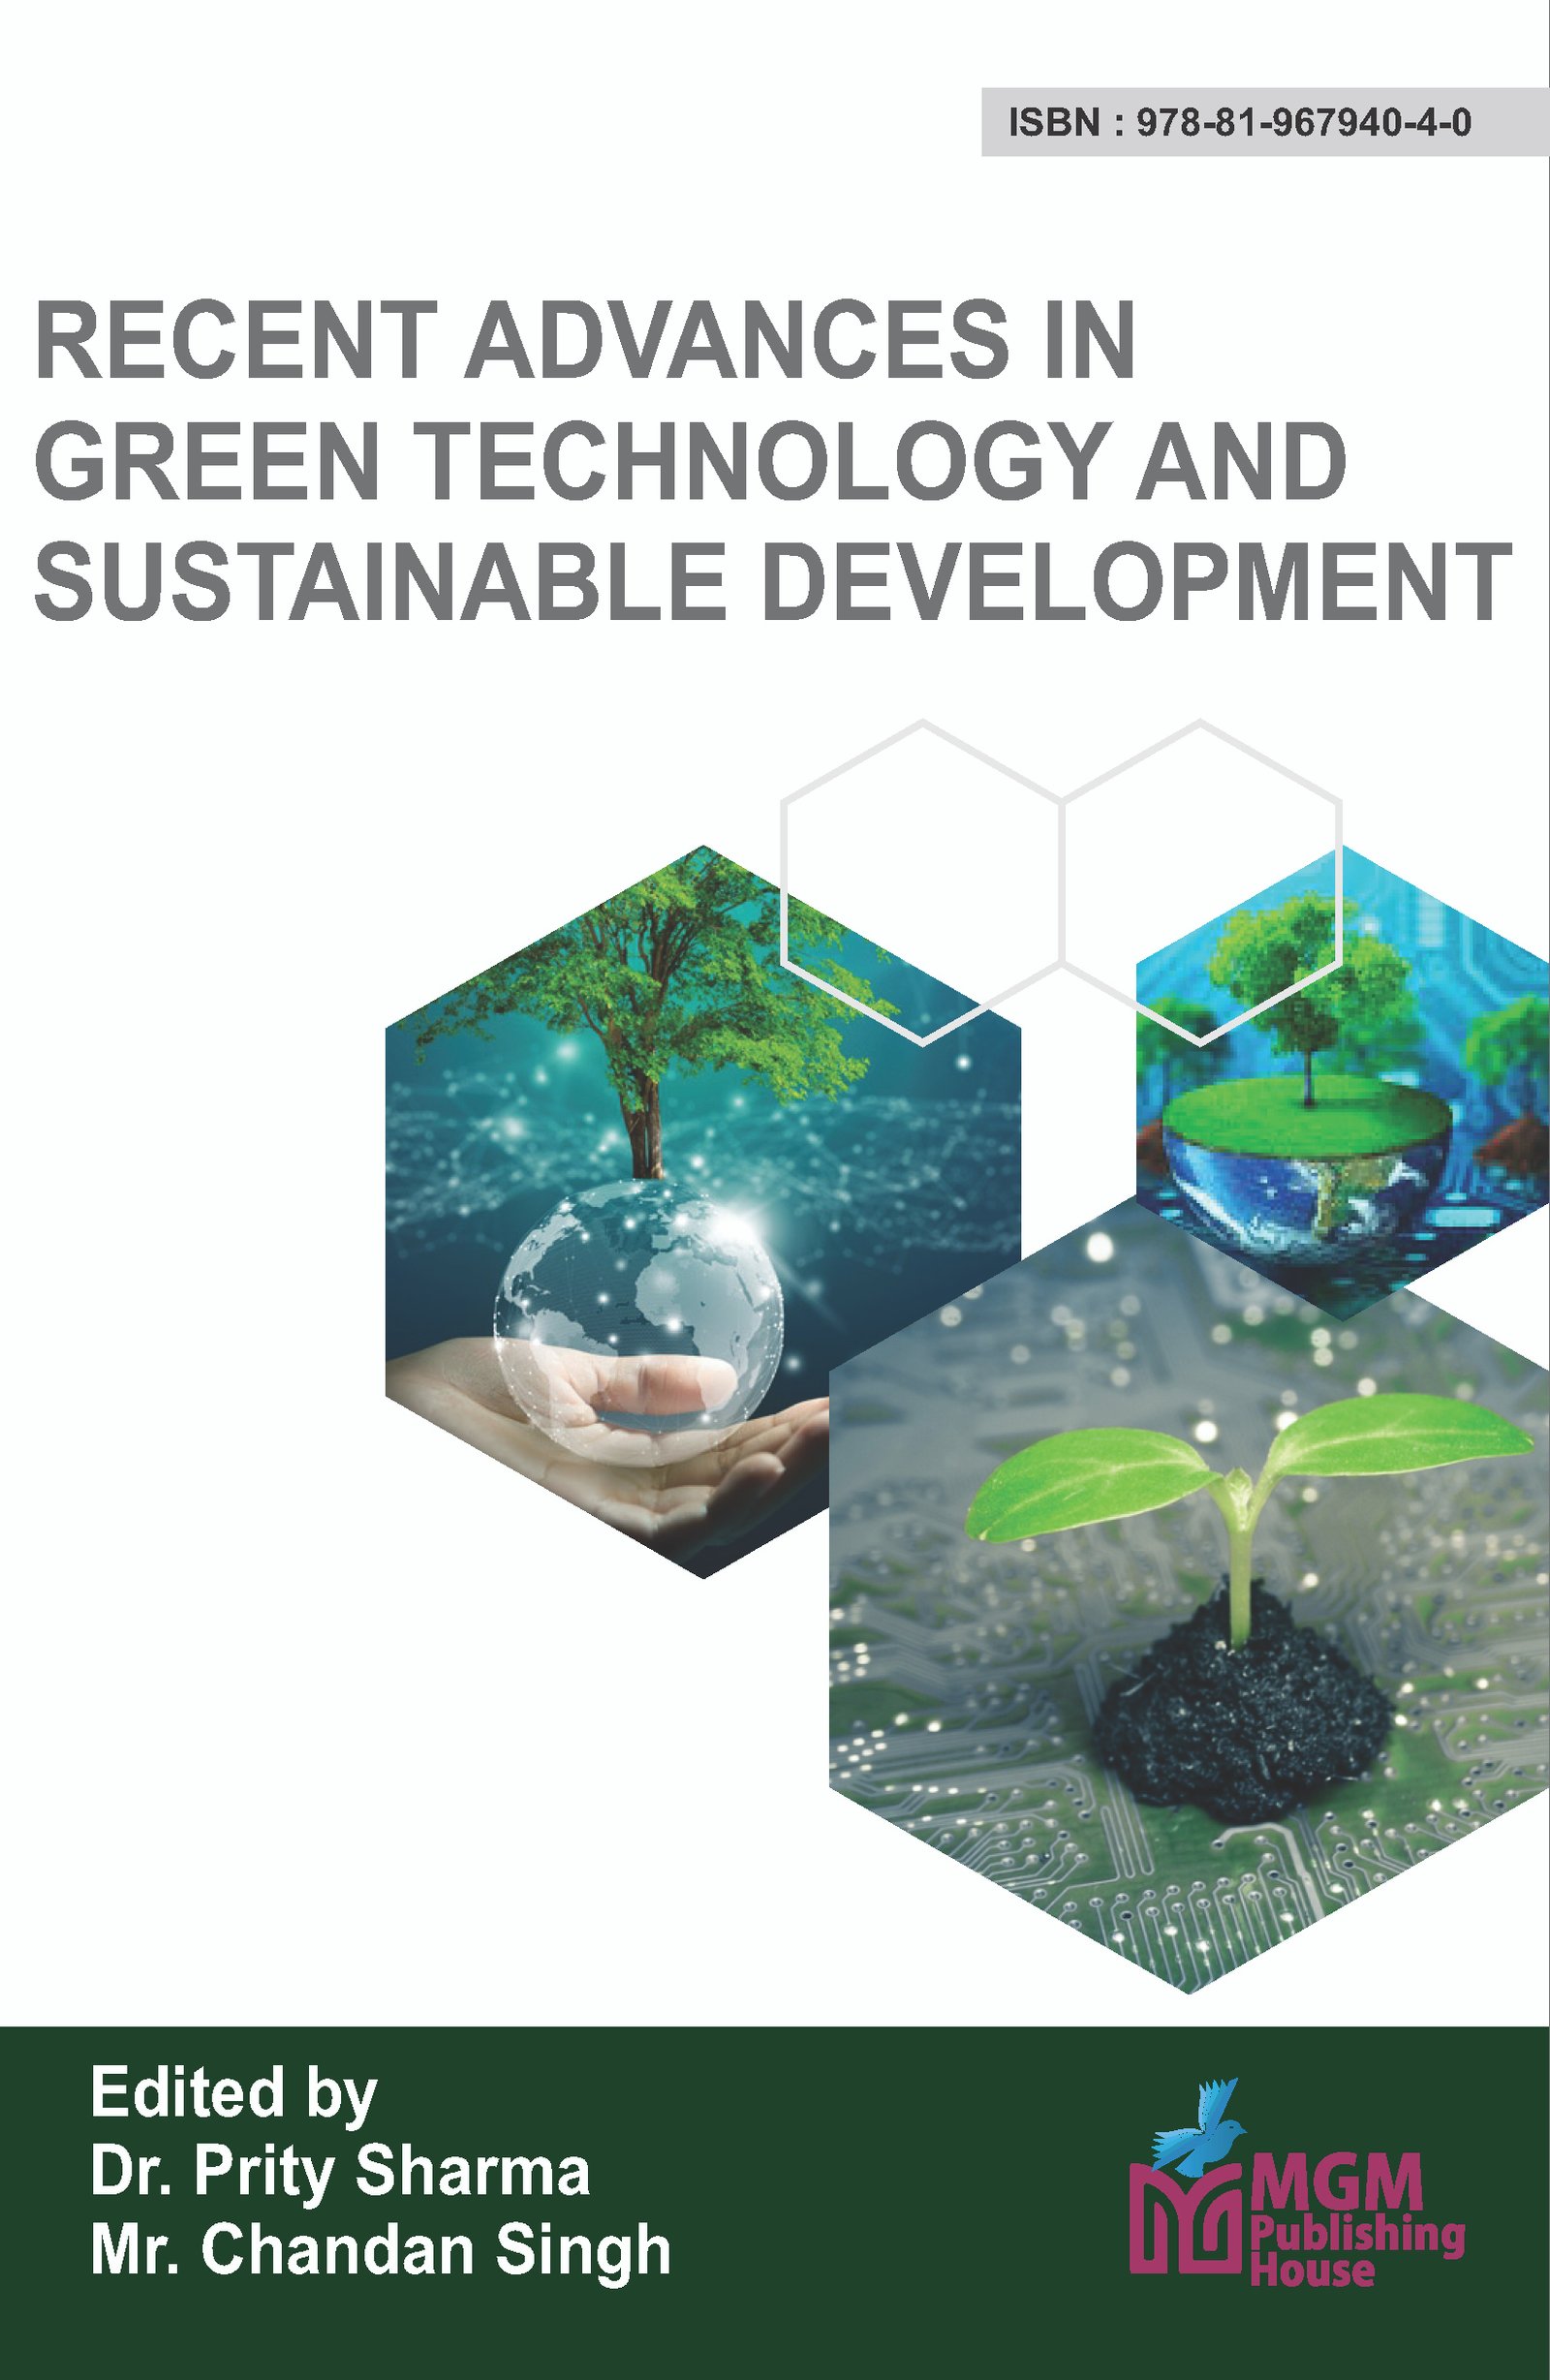 RECENT ADVANCES IN  GREEN TECHNOLOGY AND SUSTAINABLE DEVELOPMENT